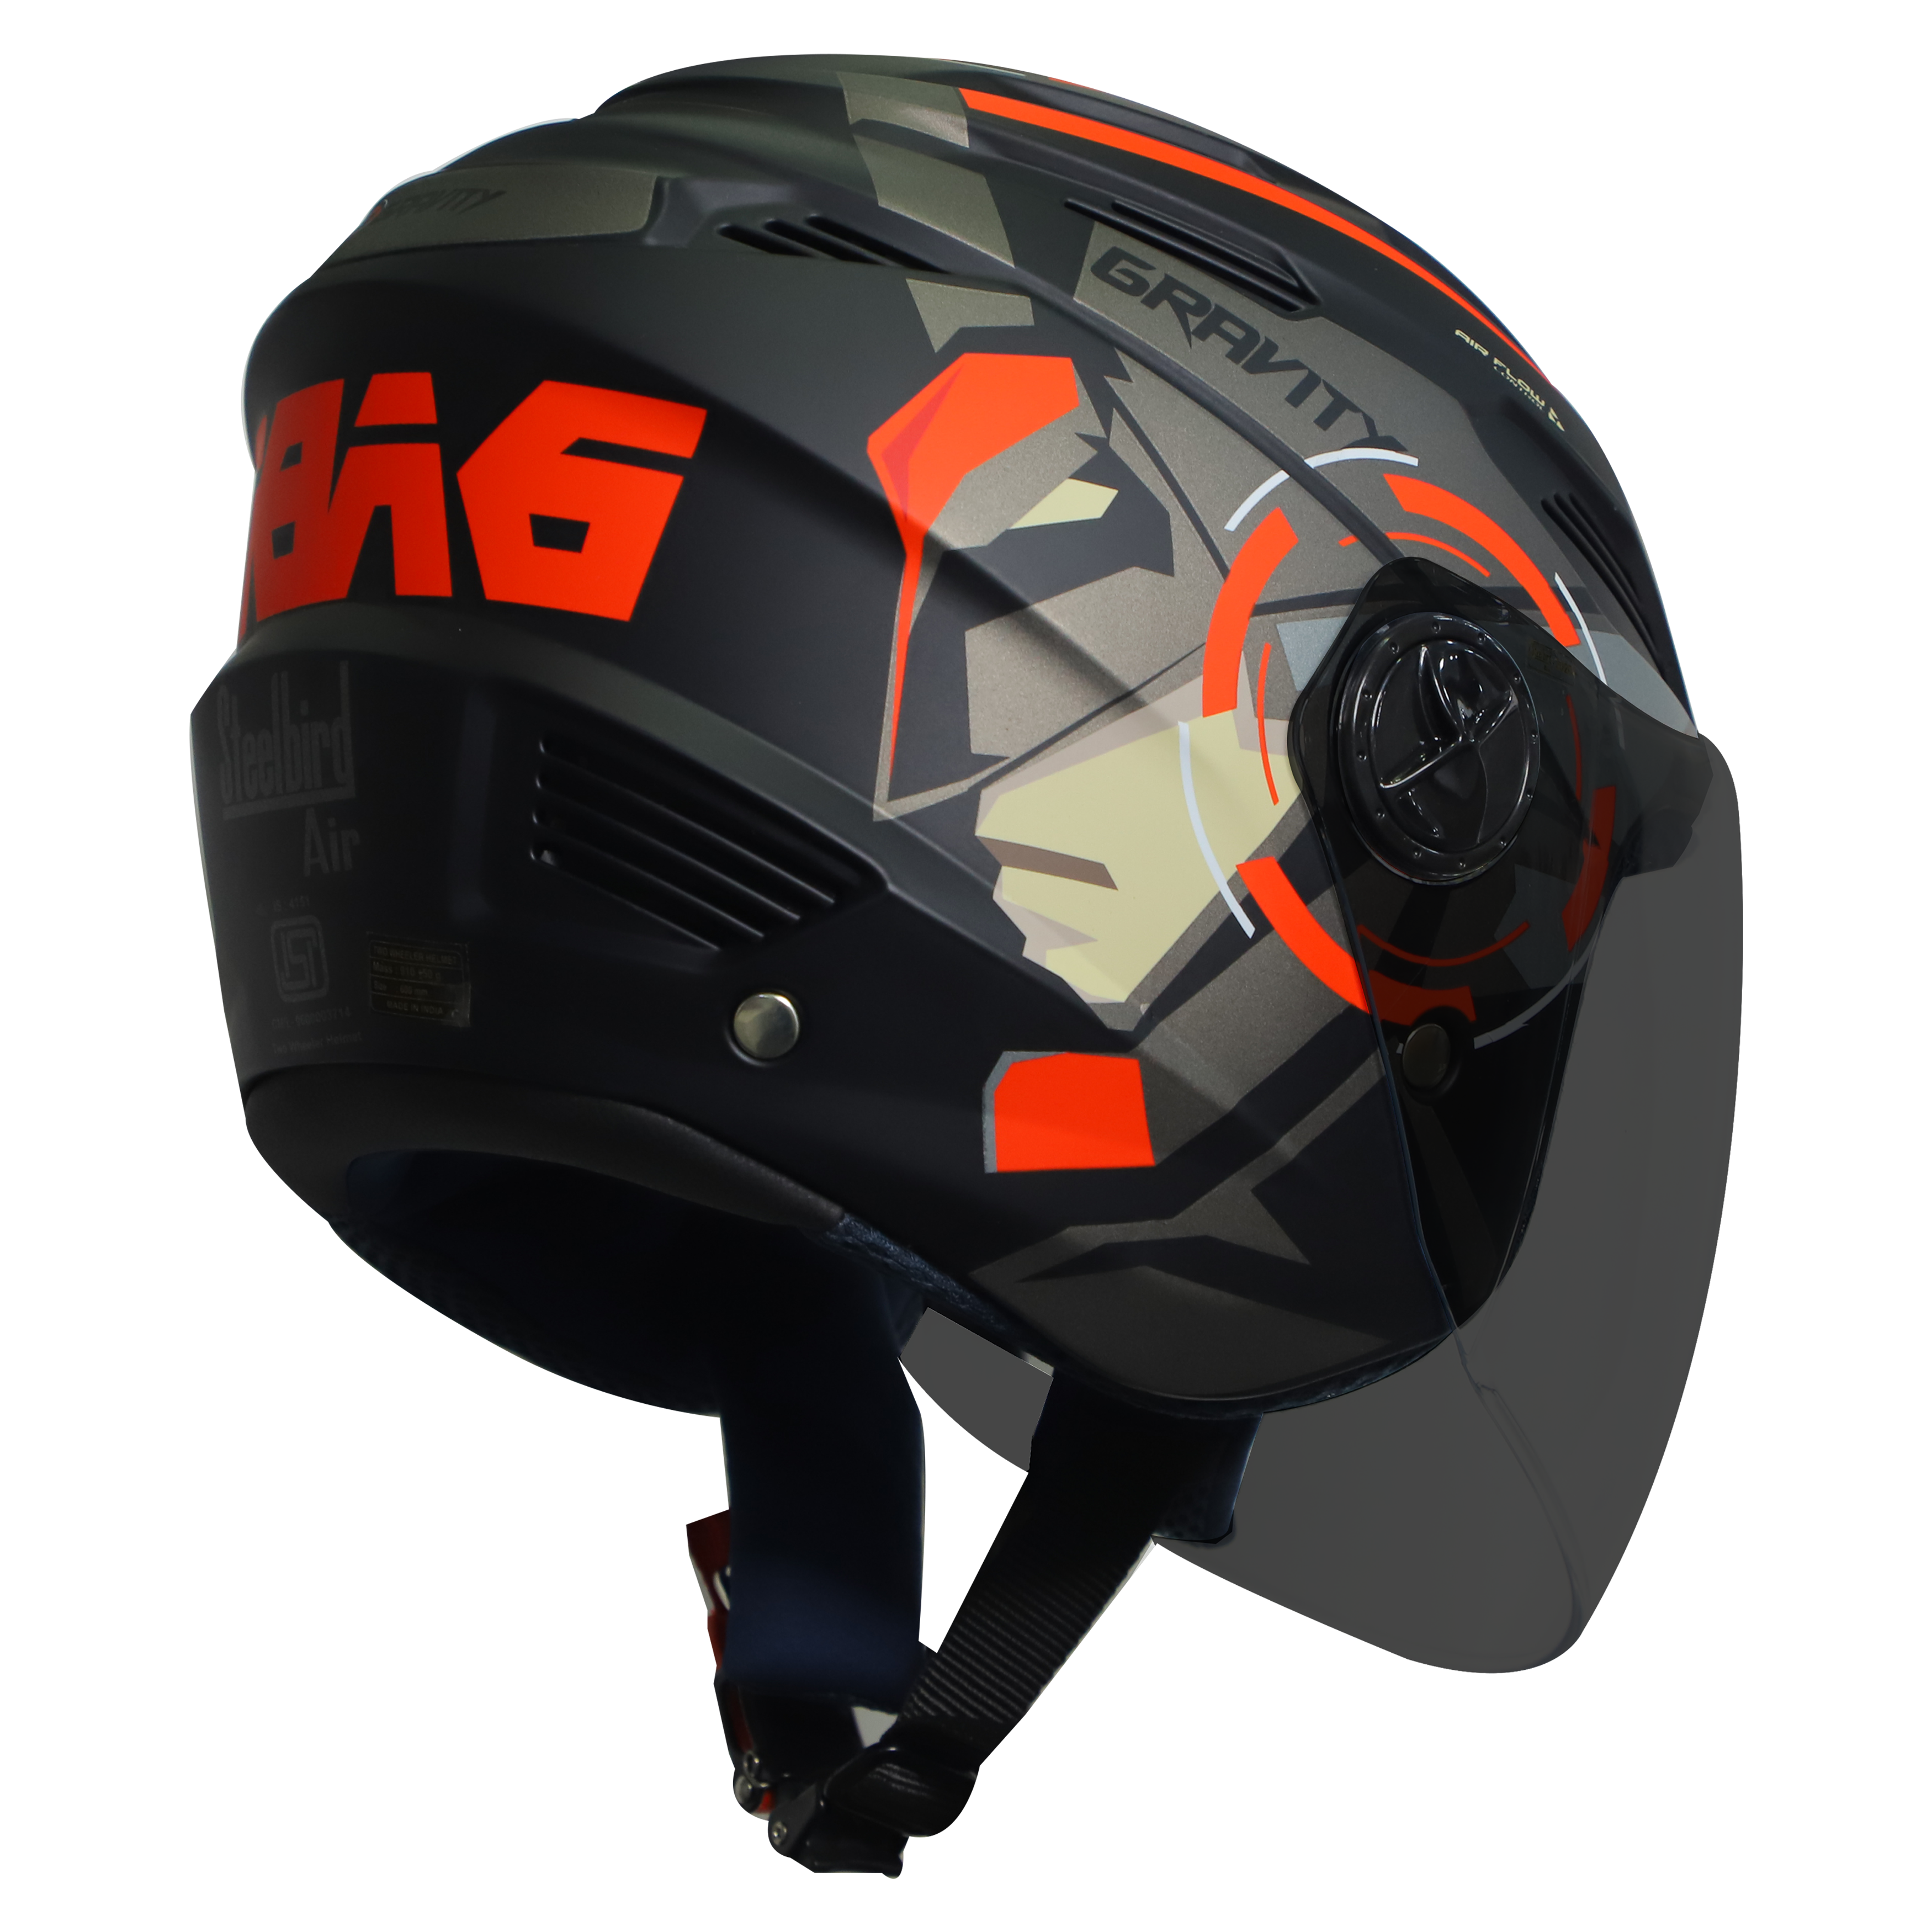 SBA-6 GRAVITY MAT BLACK WITH ORANGE (FITTED WITH CLEAR VISOR EXTRA SMOKE VISOR FREE)